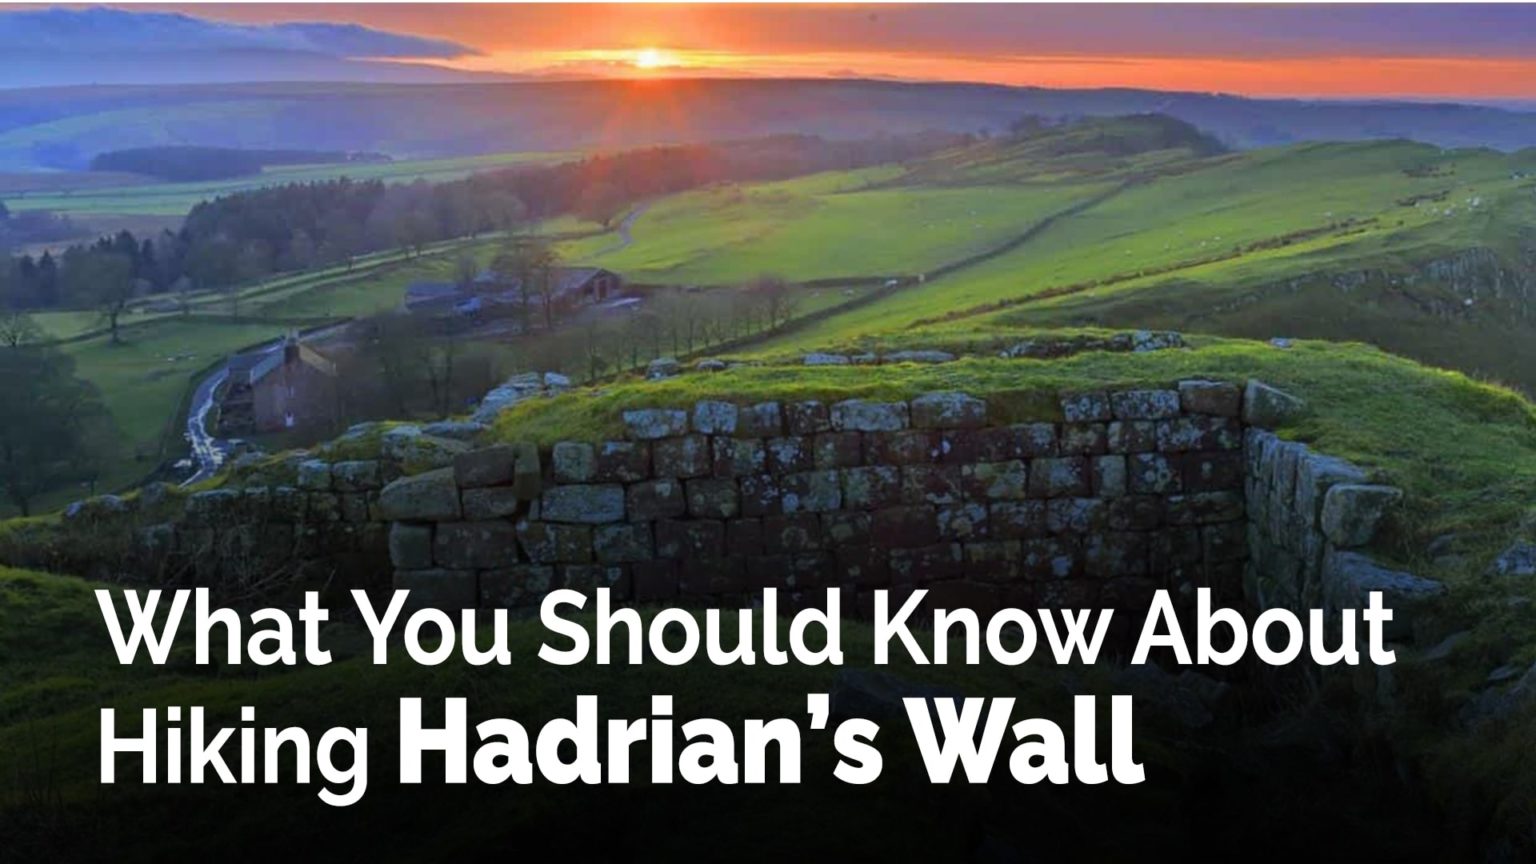 What You Should Know About Hiking Hadrian’s Wall